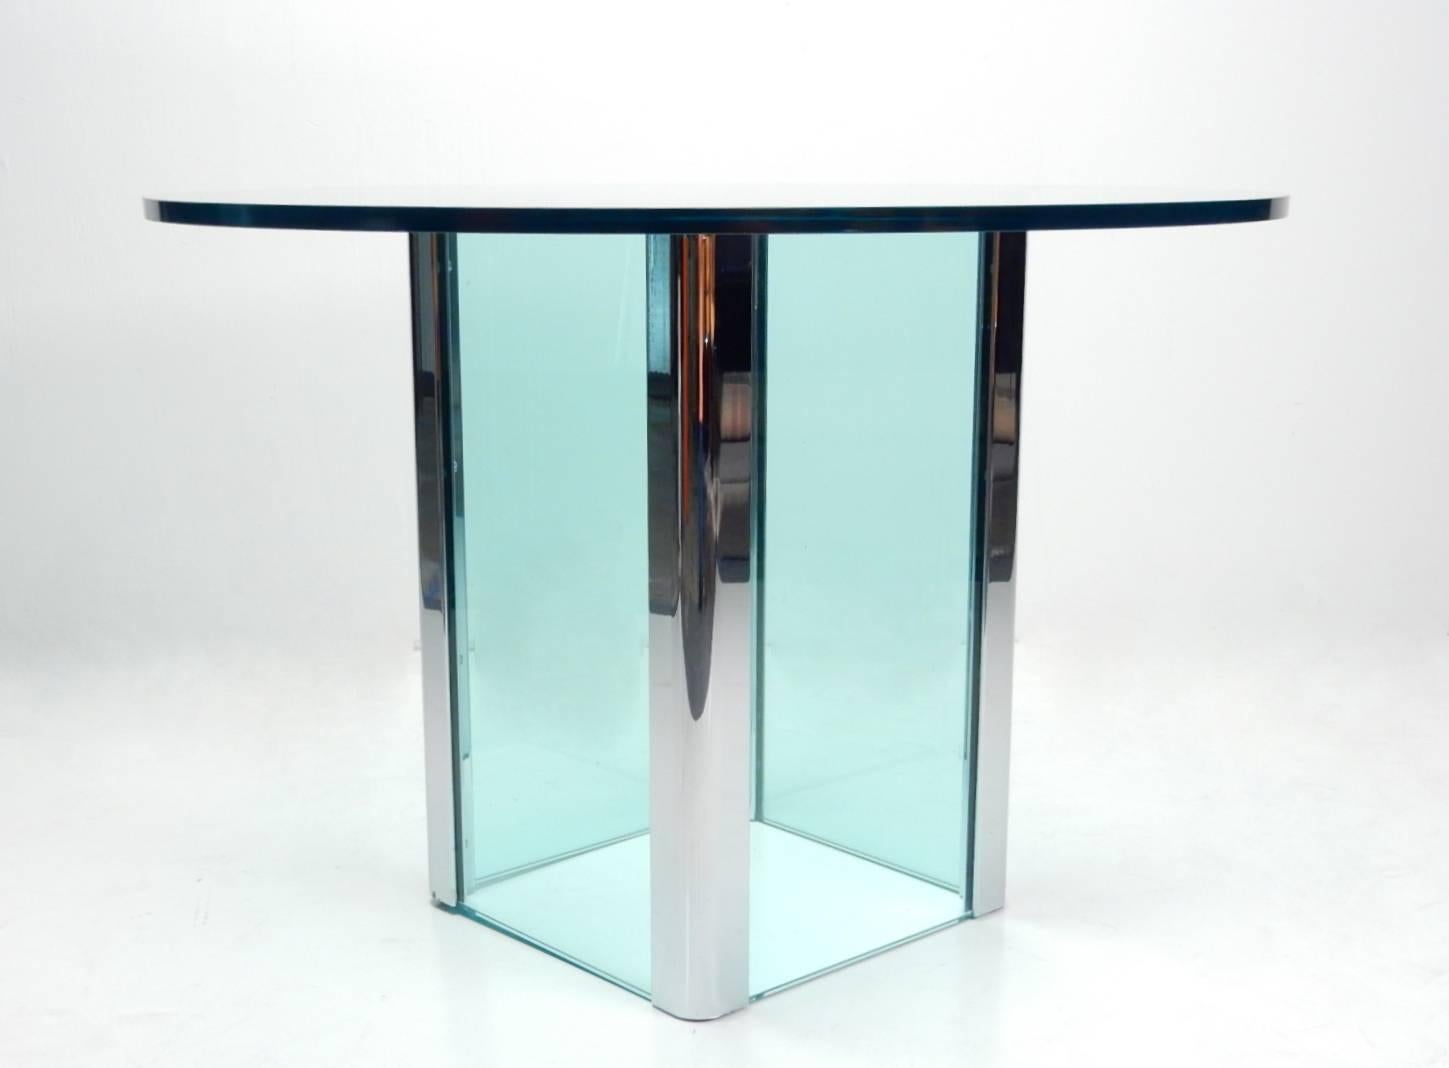 1970s Leon Rosen for Pace Glass and chrome foyer table.
Thick glass base sides with chromed steel corners.
Matching thick round glass top. Gorgeous agua tint.